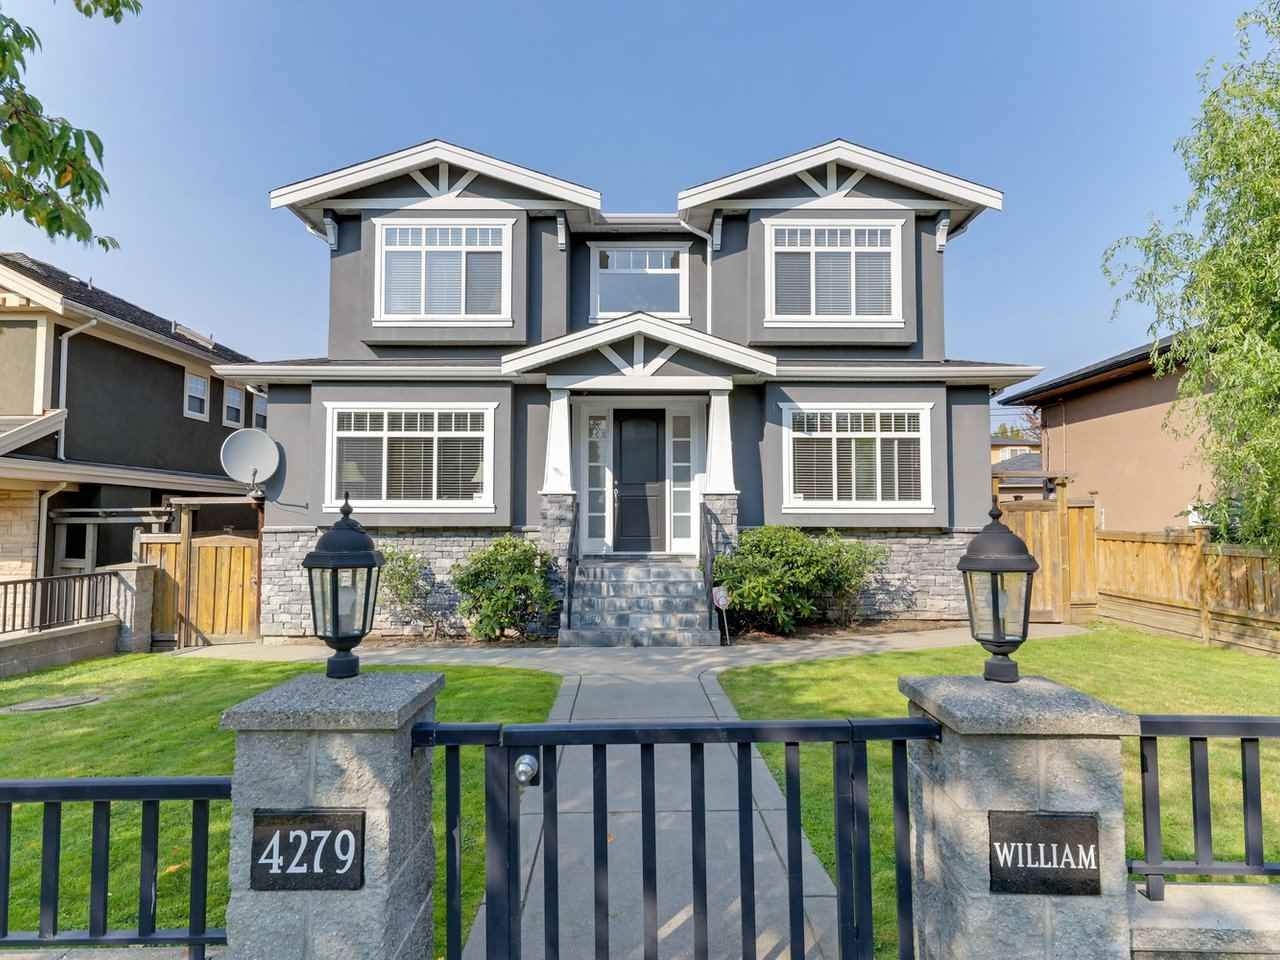 Main Photo: 4279 WILLIAM Street in Burnaby: Willingdon Heights House for sale (Burnaby North)  : MLS®# R2504387